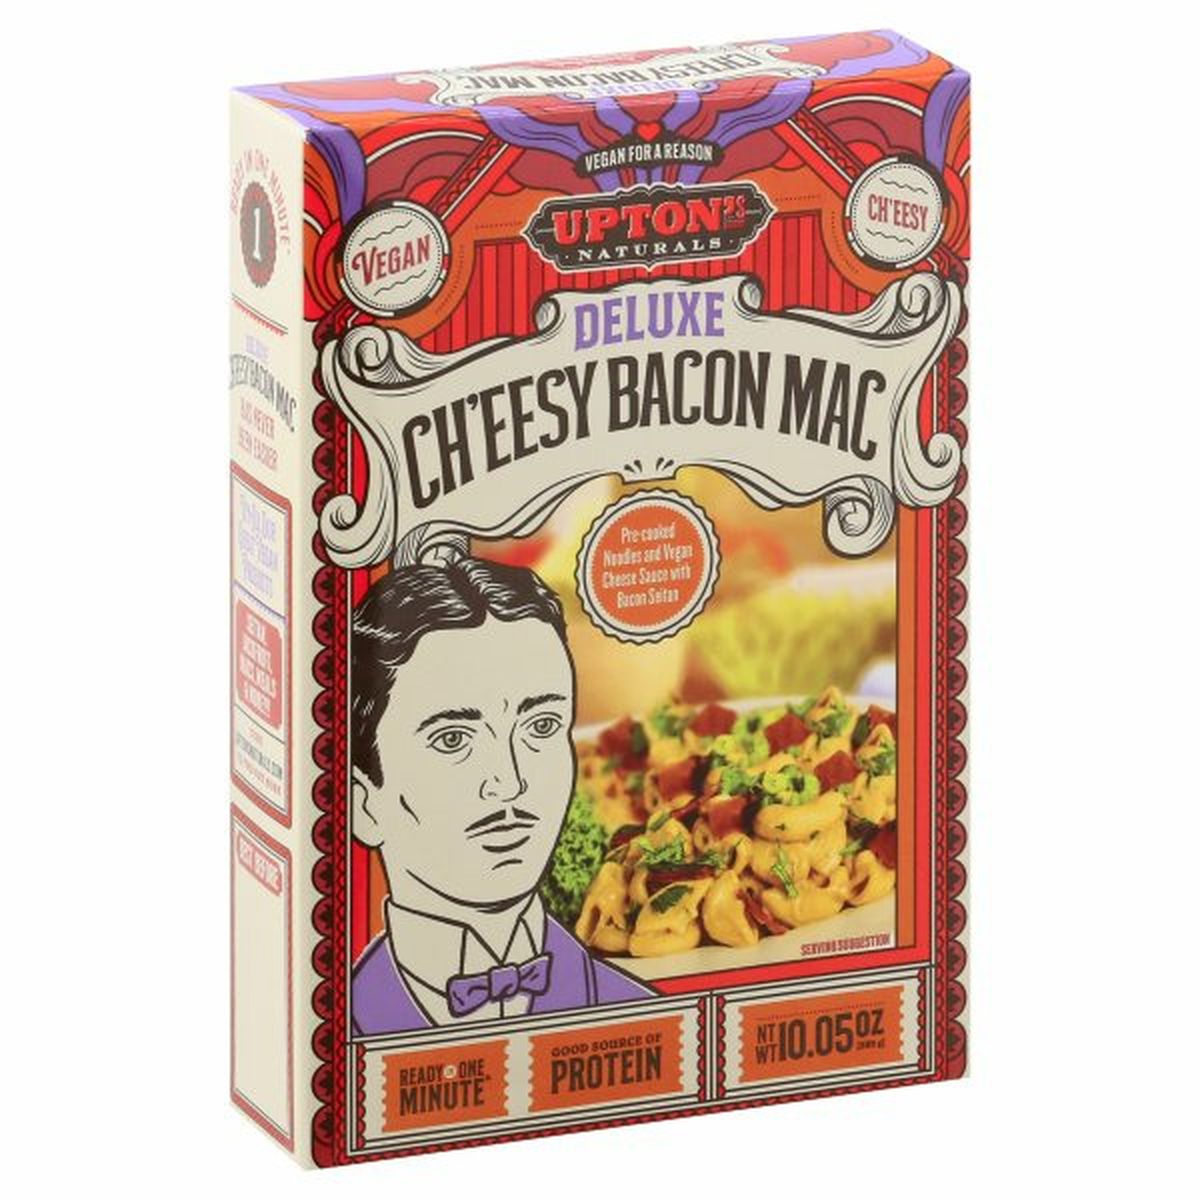 Calories in Upton's Naturals Ch'eesy Bacon Mac, Deluxe